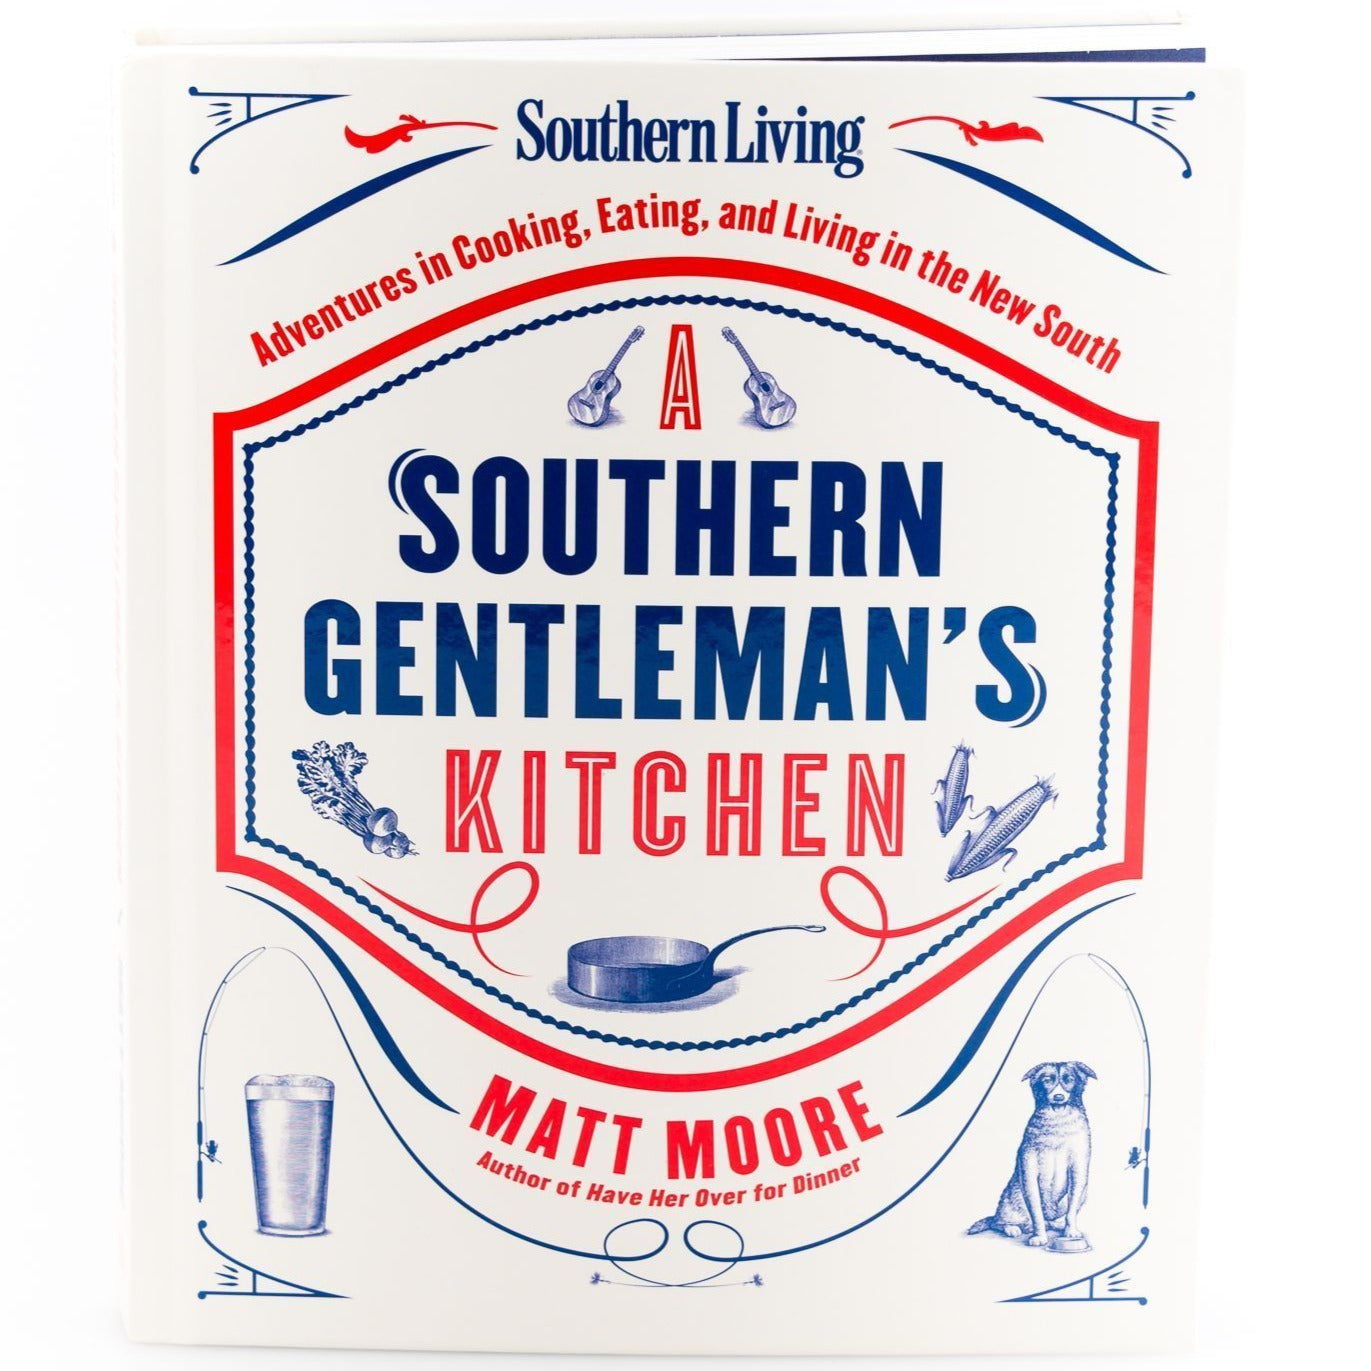 A Southern Gentleman's Kitchen: Adventures in Cooking, Eating, and Living in the New South by Matt Moore